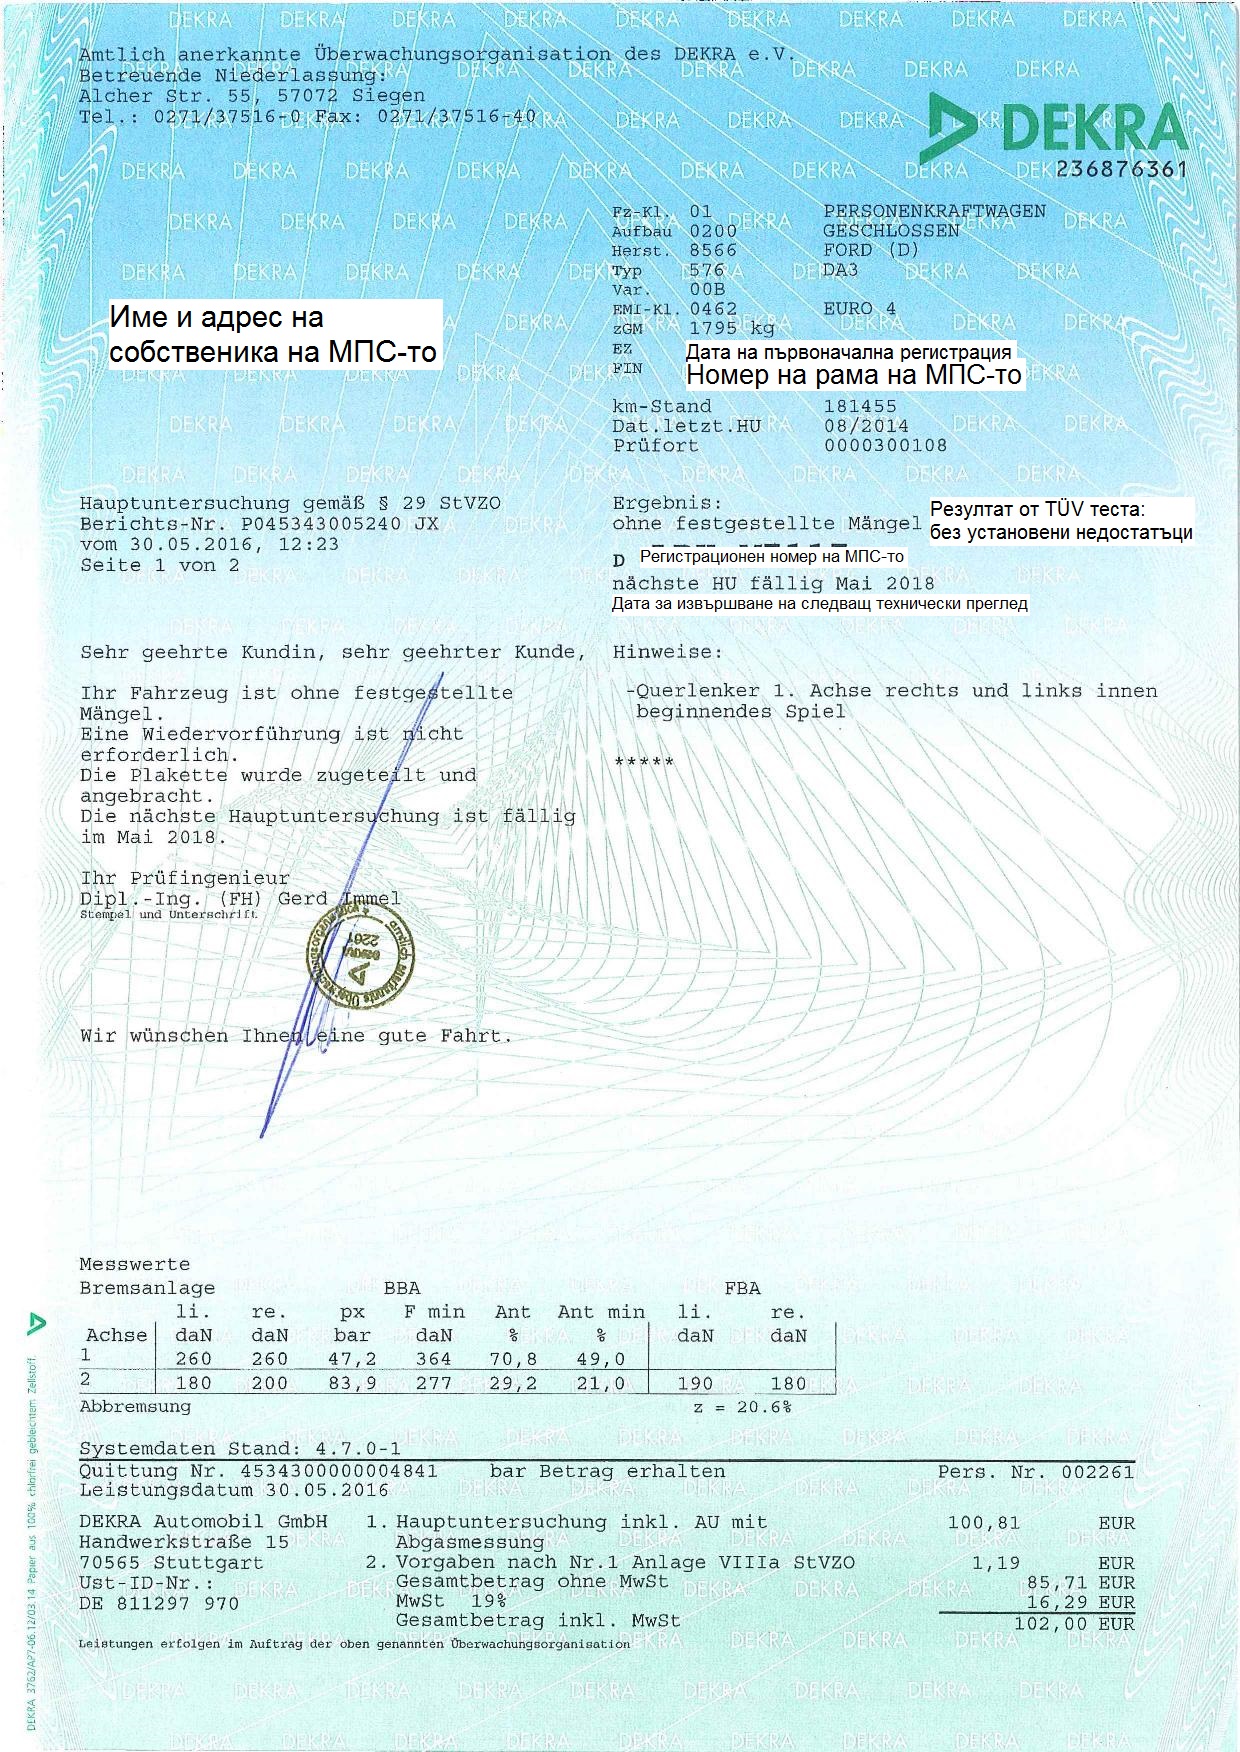 Document for successful completion of TÜV Dekra test (technical check)